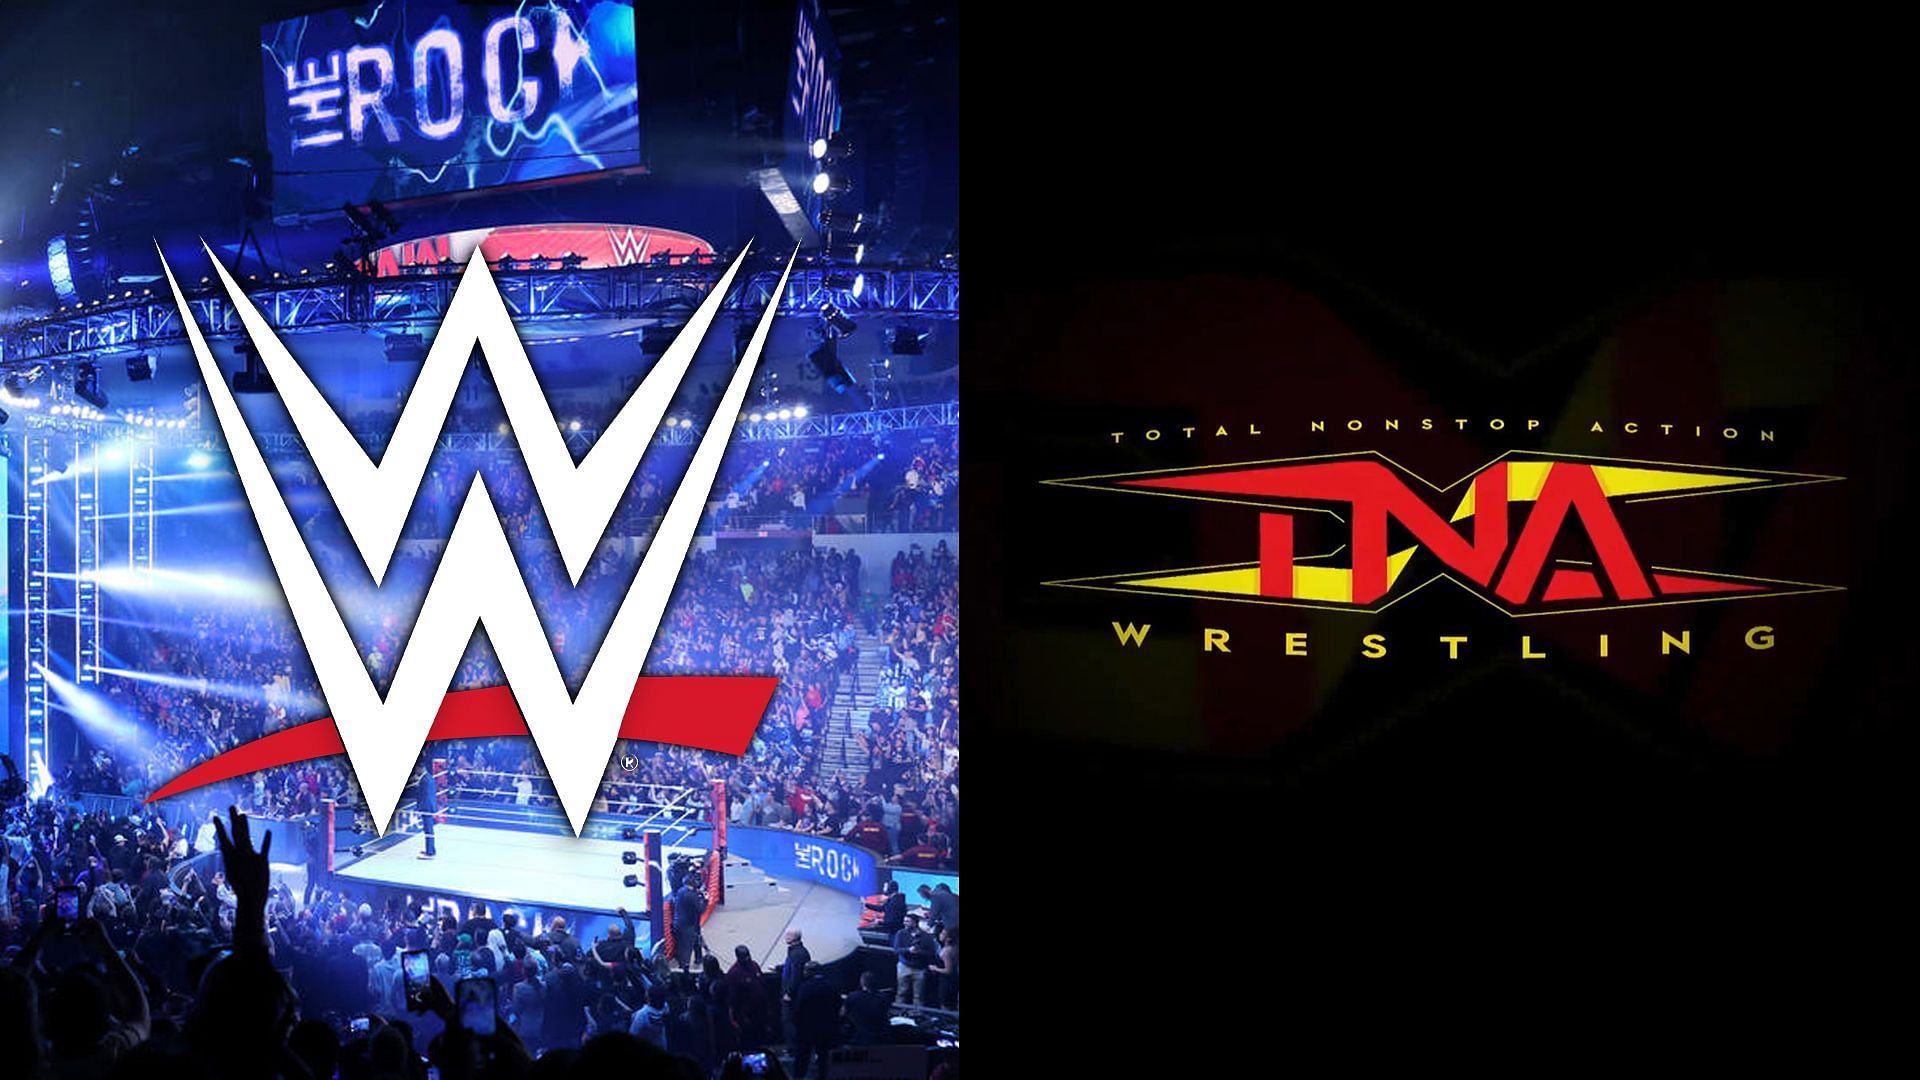 WWE and TNA have been rivals for decades (image credits: WWE.com; TNA on X)